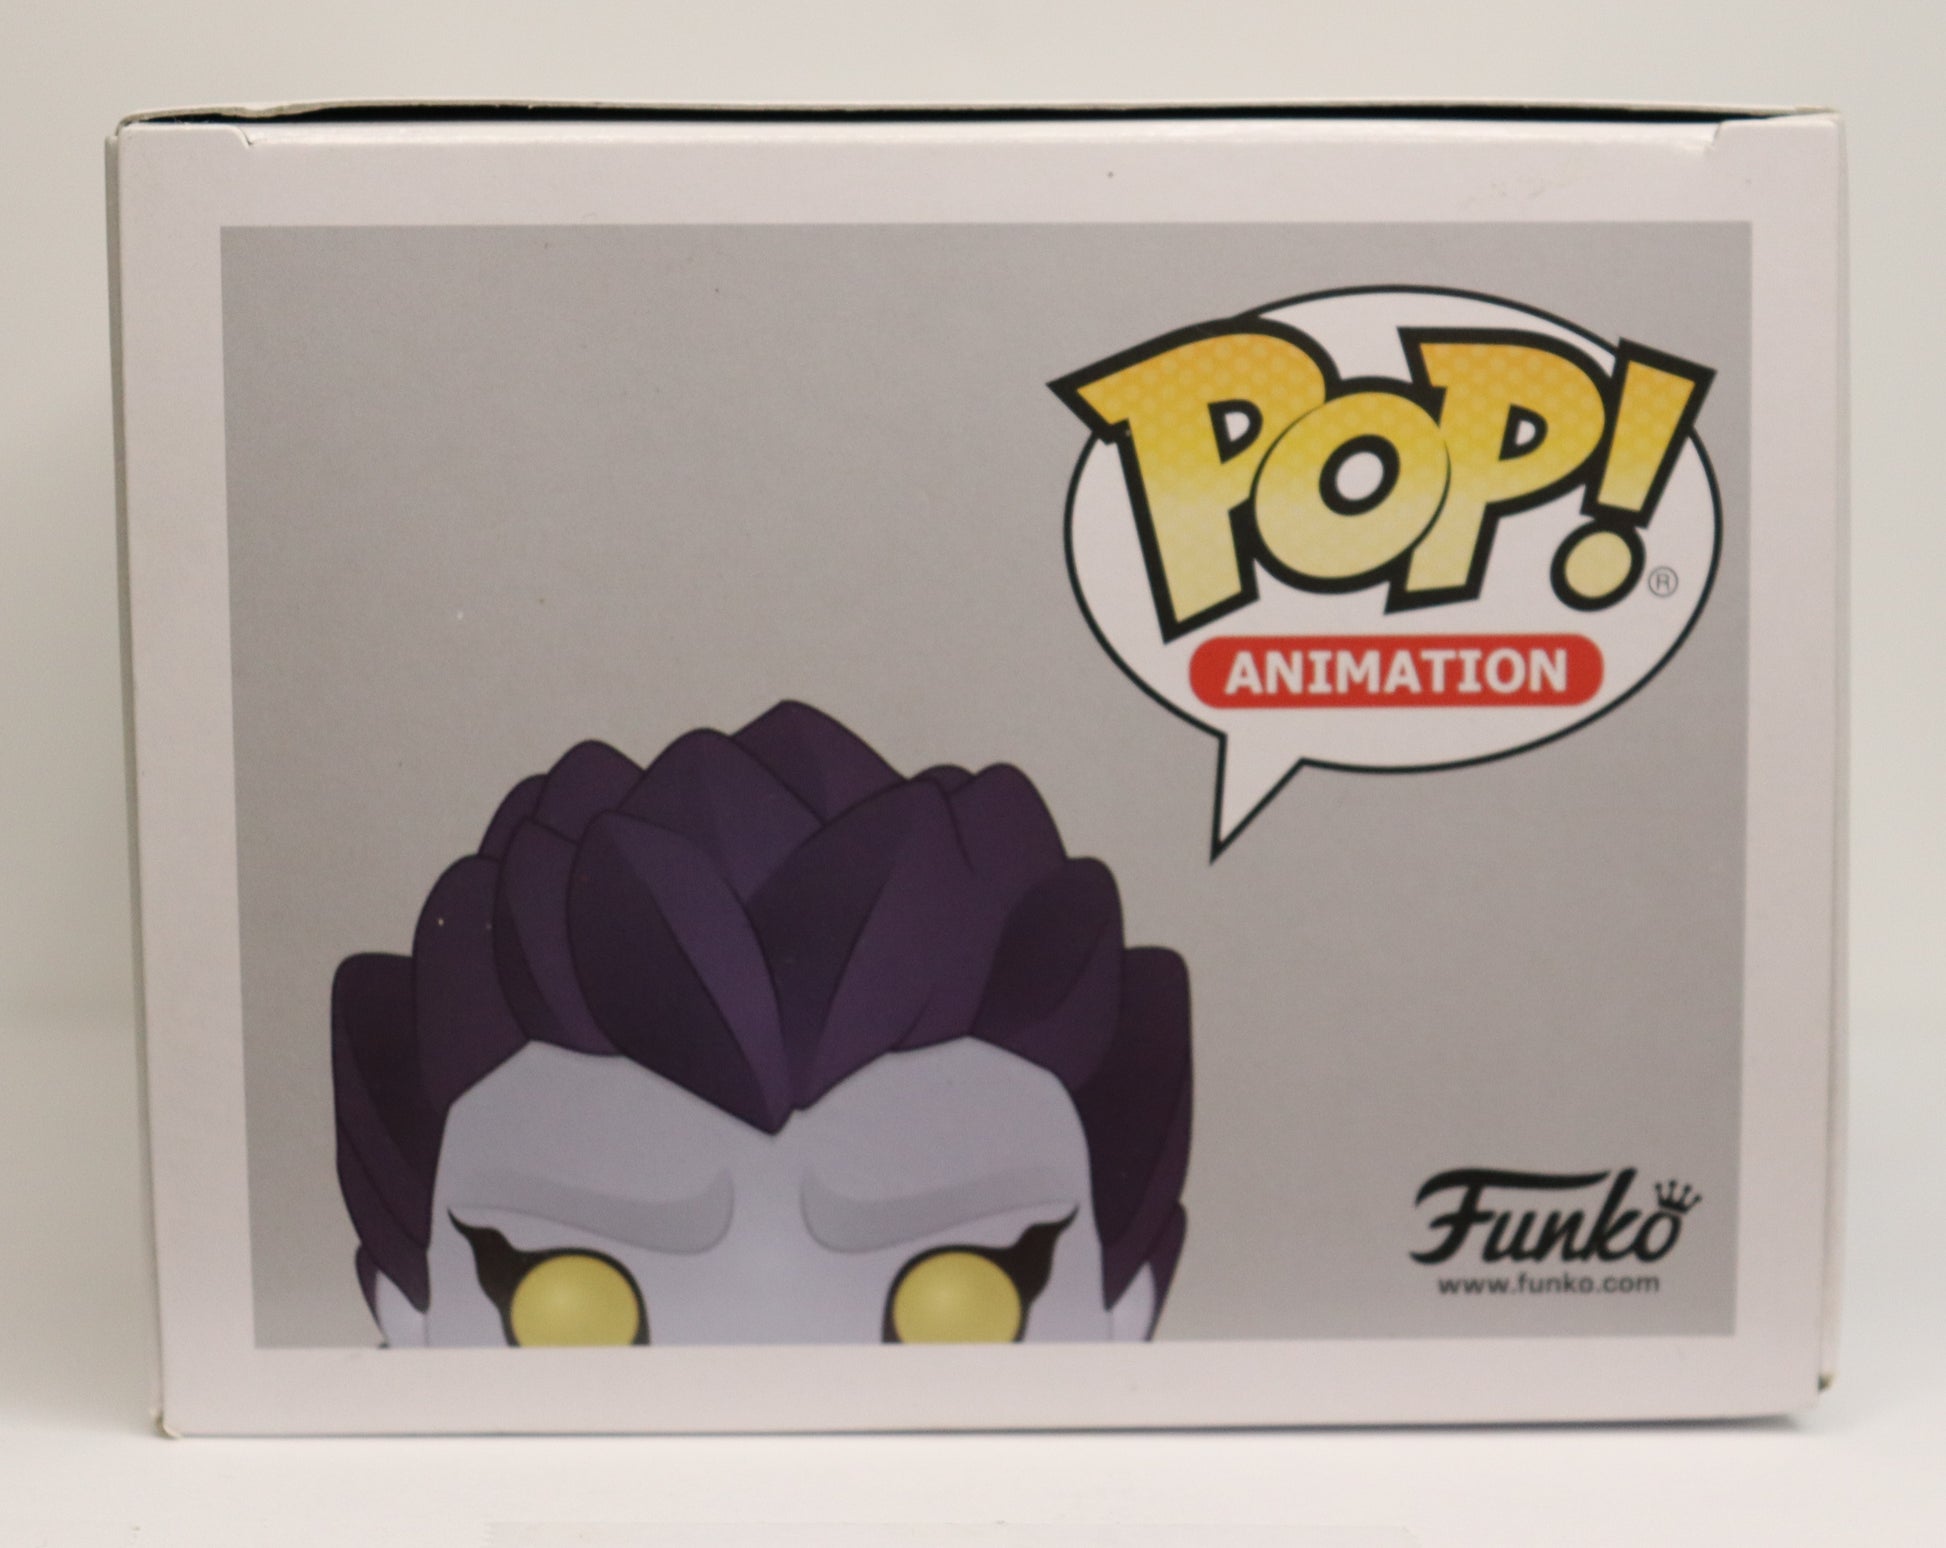 Ryuk Death Note Funko Pop – Elevate Your Collection